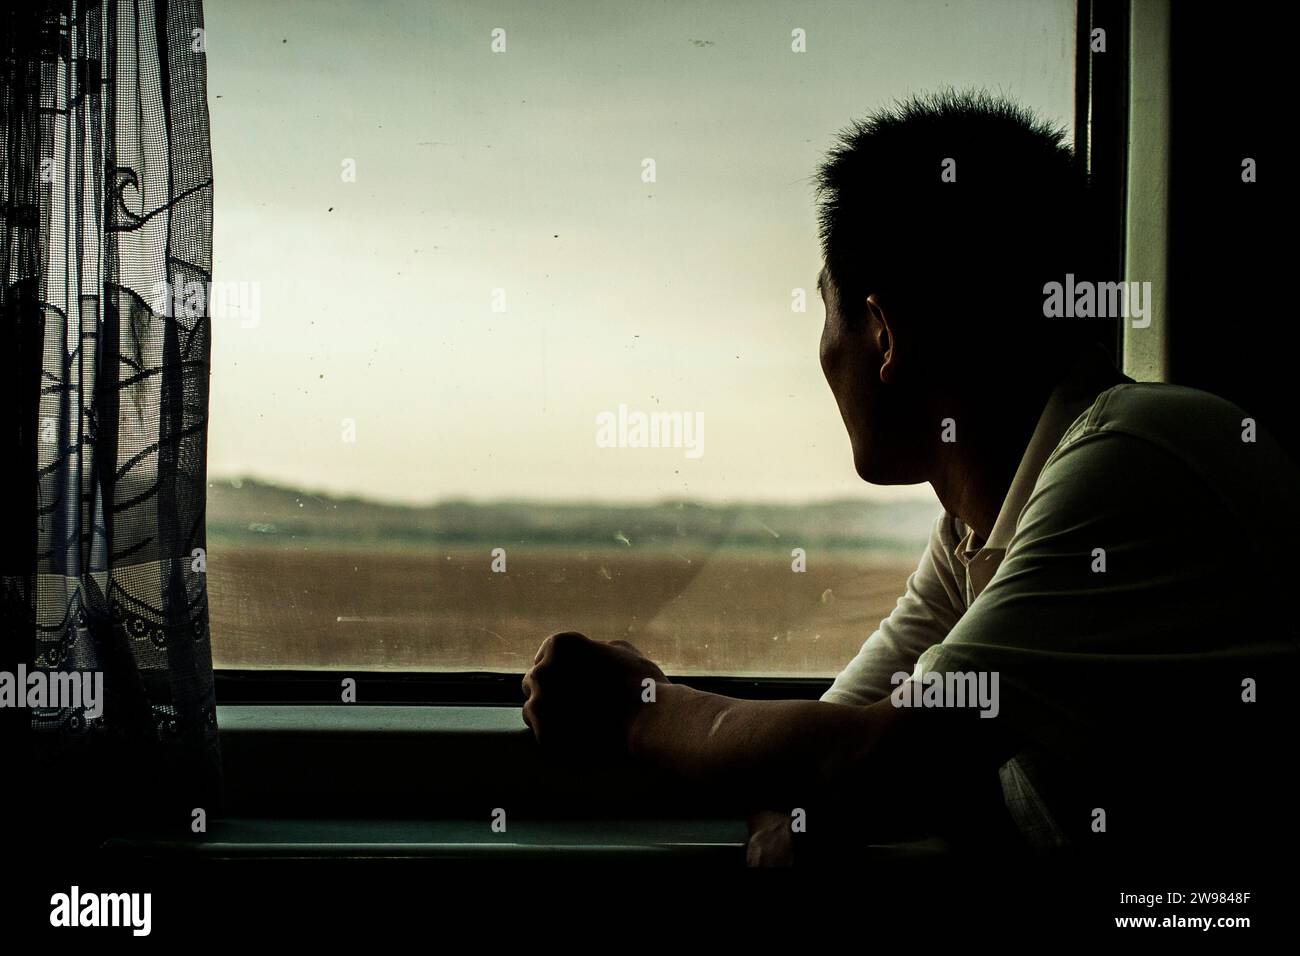 A Chinese man watching the world pass by from a train window. Stock Photo